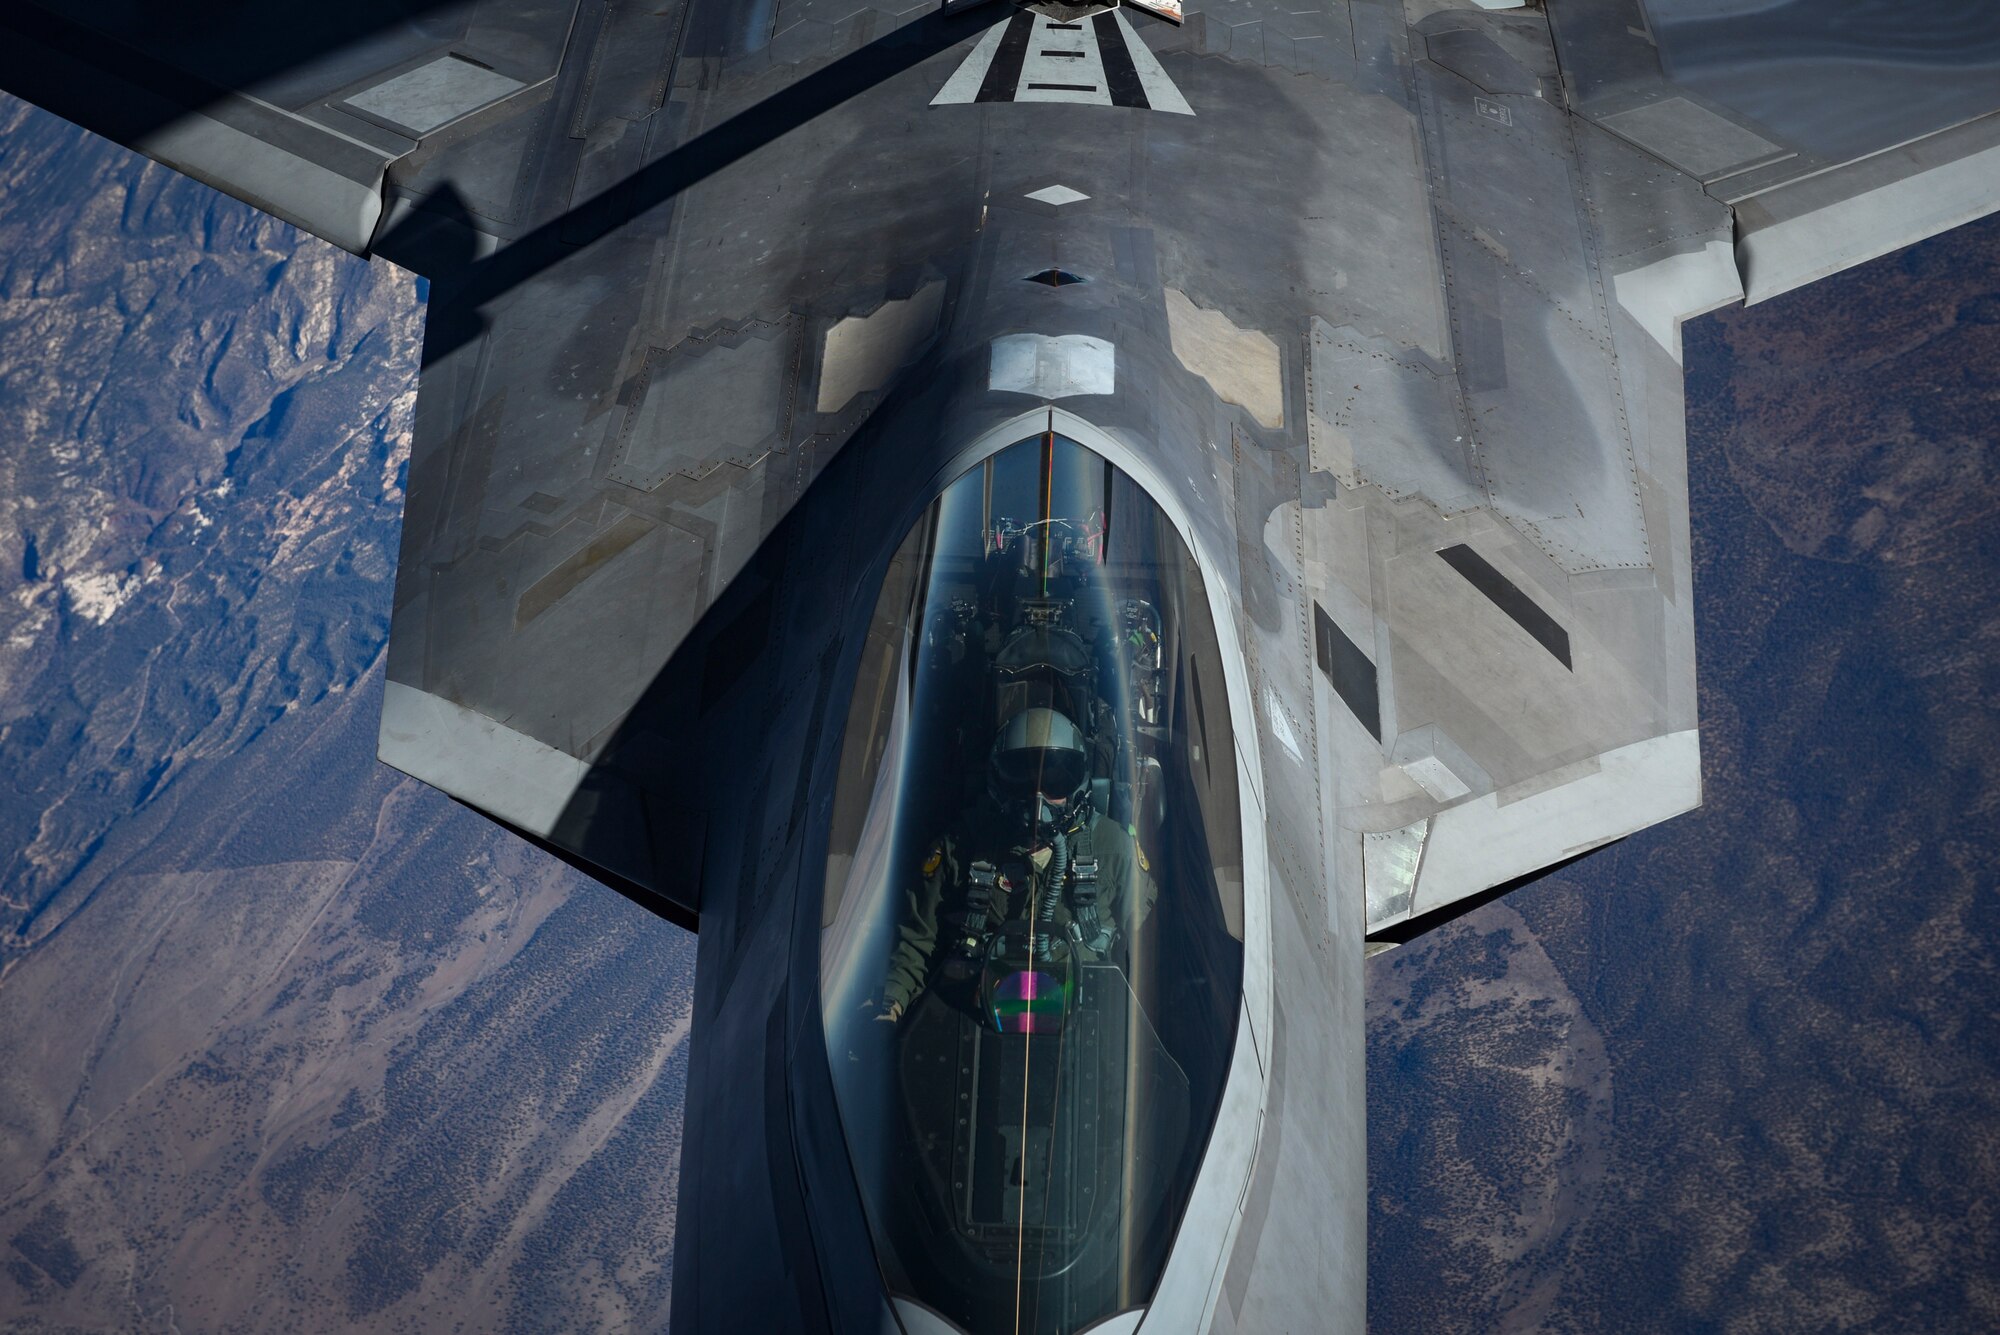 An F-22 Raptor assigned to the 27th Fighter Squadron at Joint Base Langley-Eustis, Va., receives fuel during Red Flag 18-1 over the Nevada Test and Training Range, Feb. 7, 2018. Red Flag helps pilots train for real-time war scenarios and tests their readiness for future conflicts. (U.S. Air Force photo by Airman 1st Class Andrew D. Sarver)